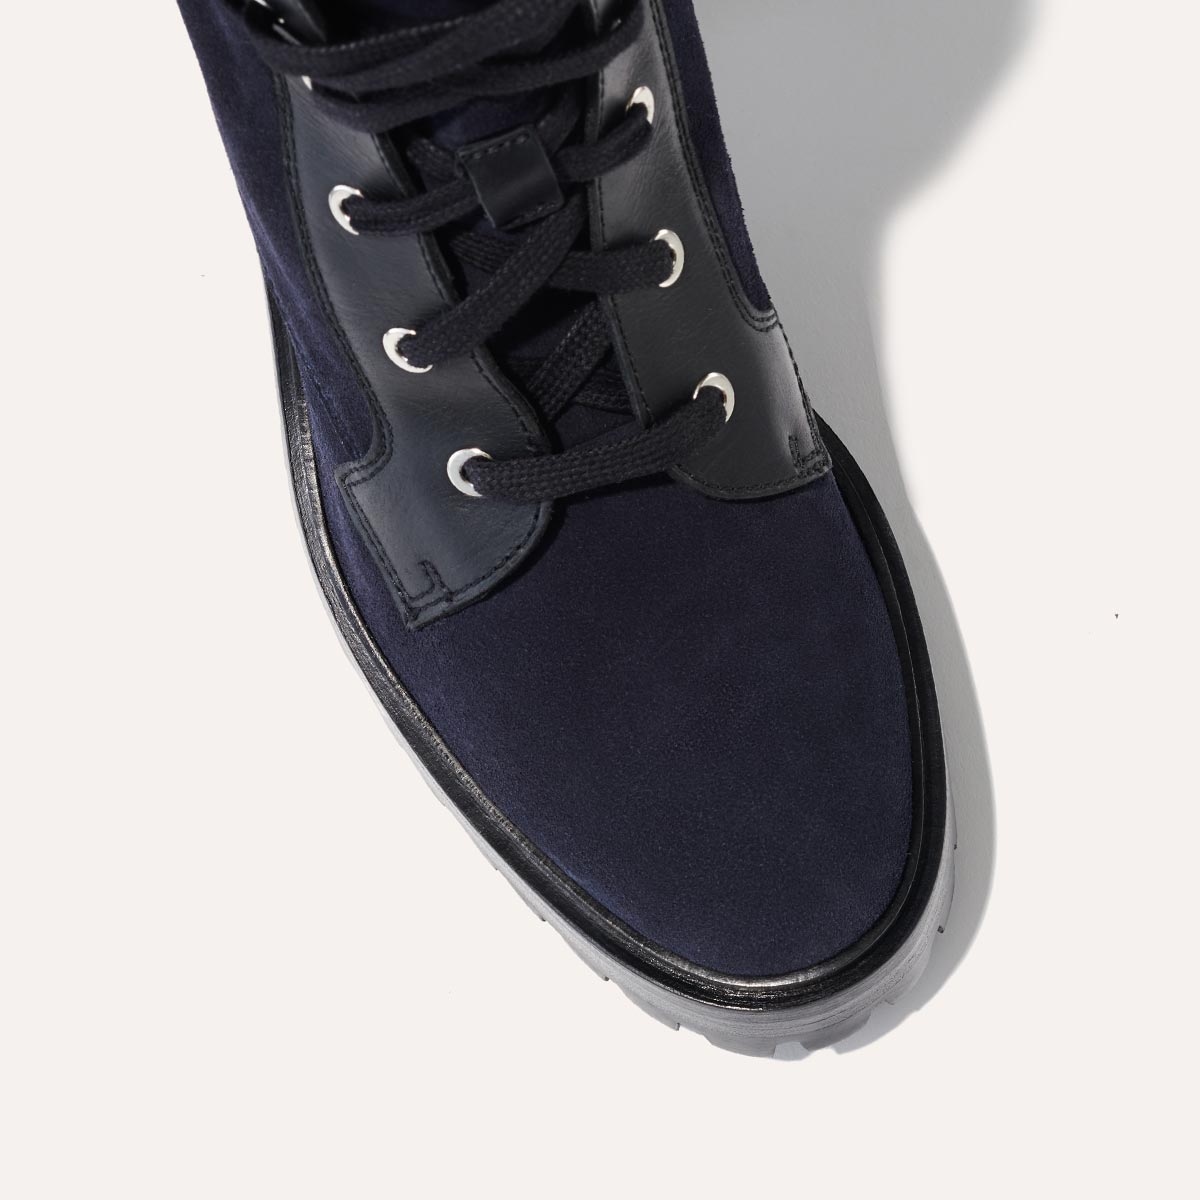 The Skater Boot - Deep Royal Suede